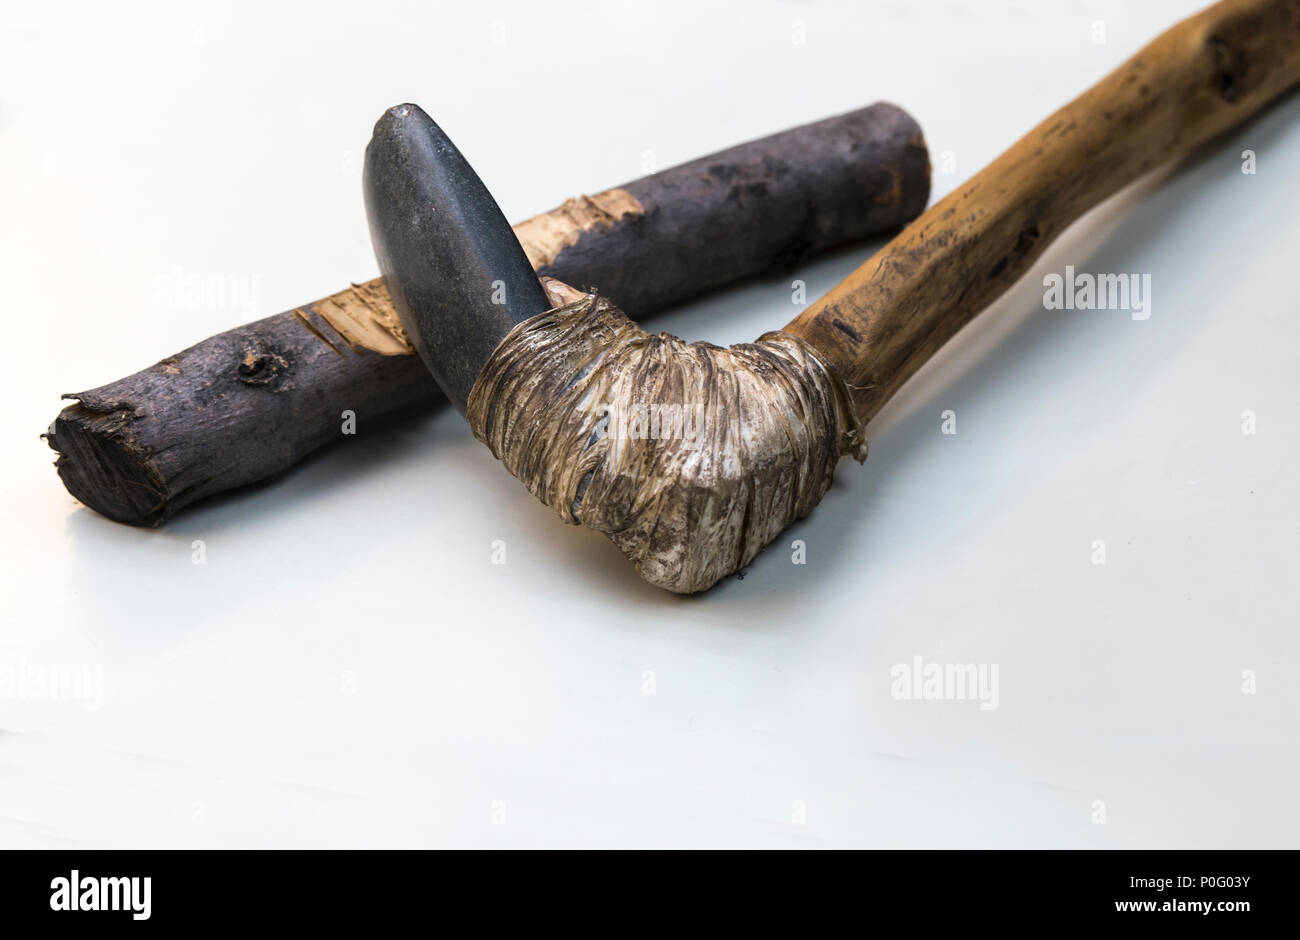 Agricultural lithic tool with wooden handle joint with tendon. Replica, Isolated over white background Stock Photo